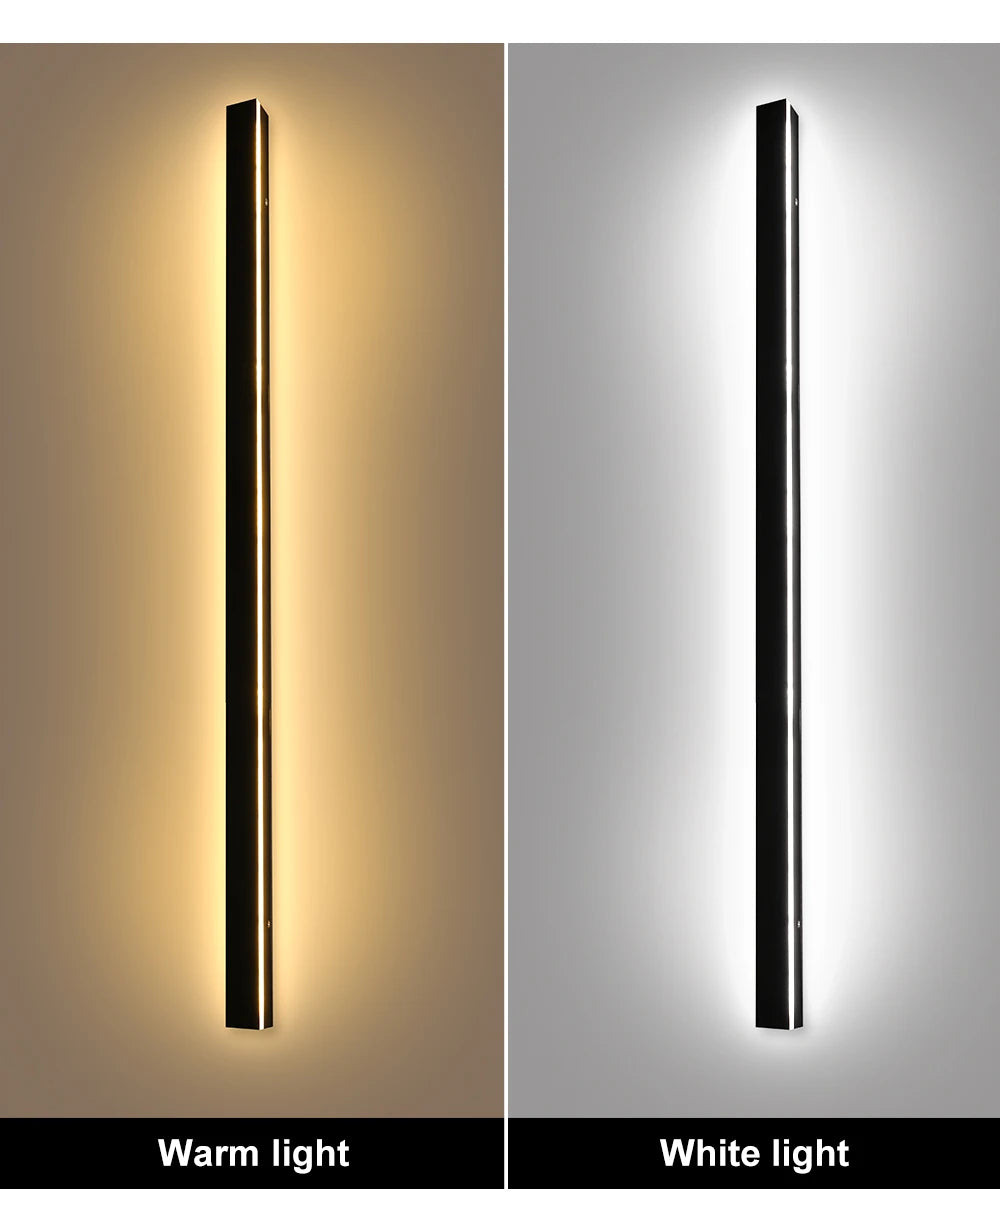 LUCKYLED Modern Led Wall Light with IP65 waterproof rating, AC85-265V voltage, and 50000+ hour lifespan.